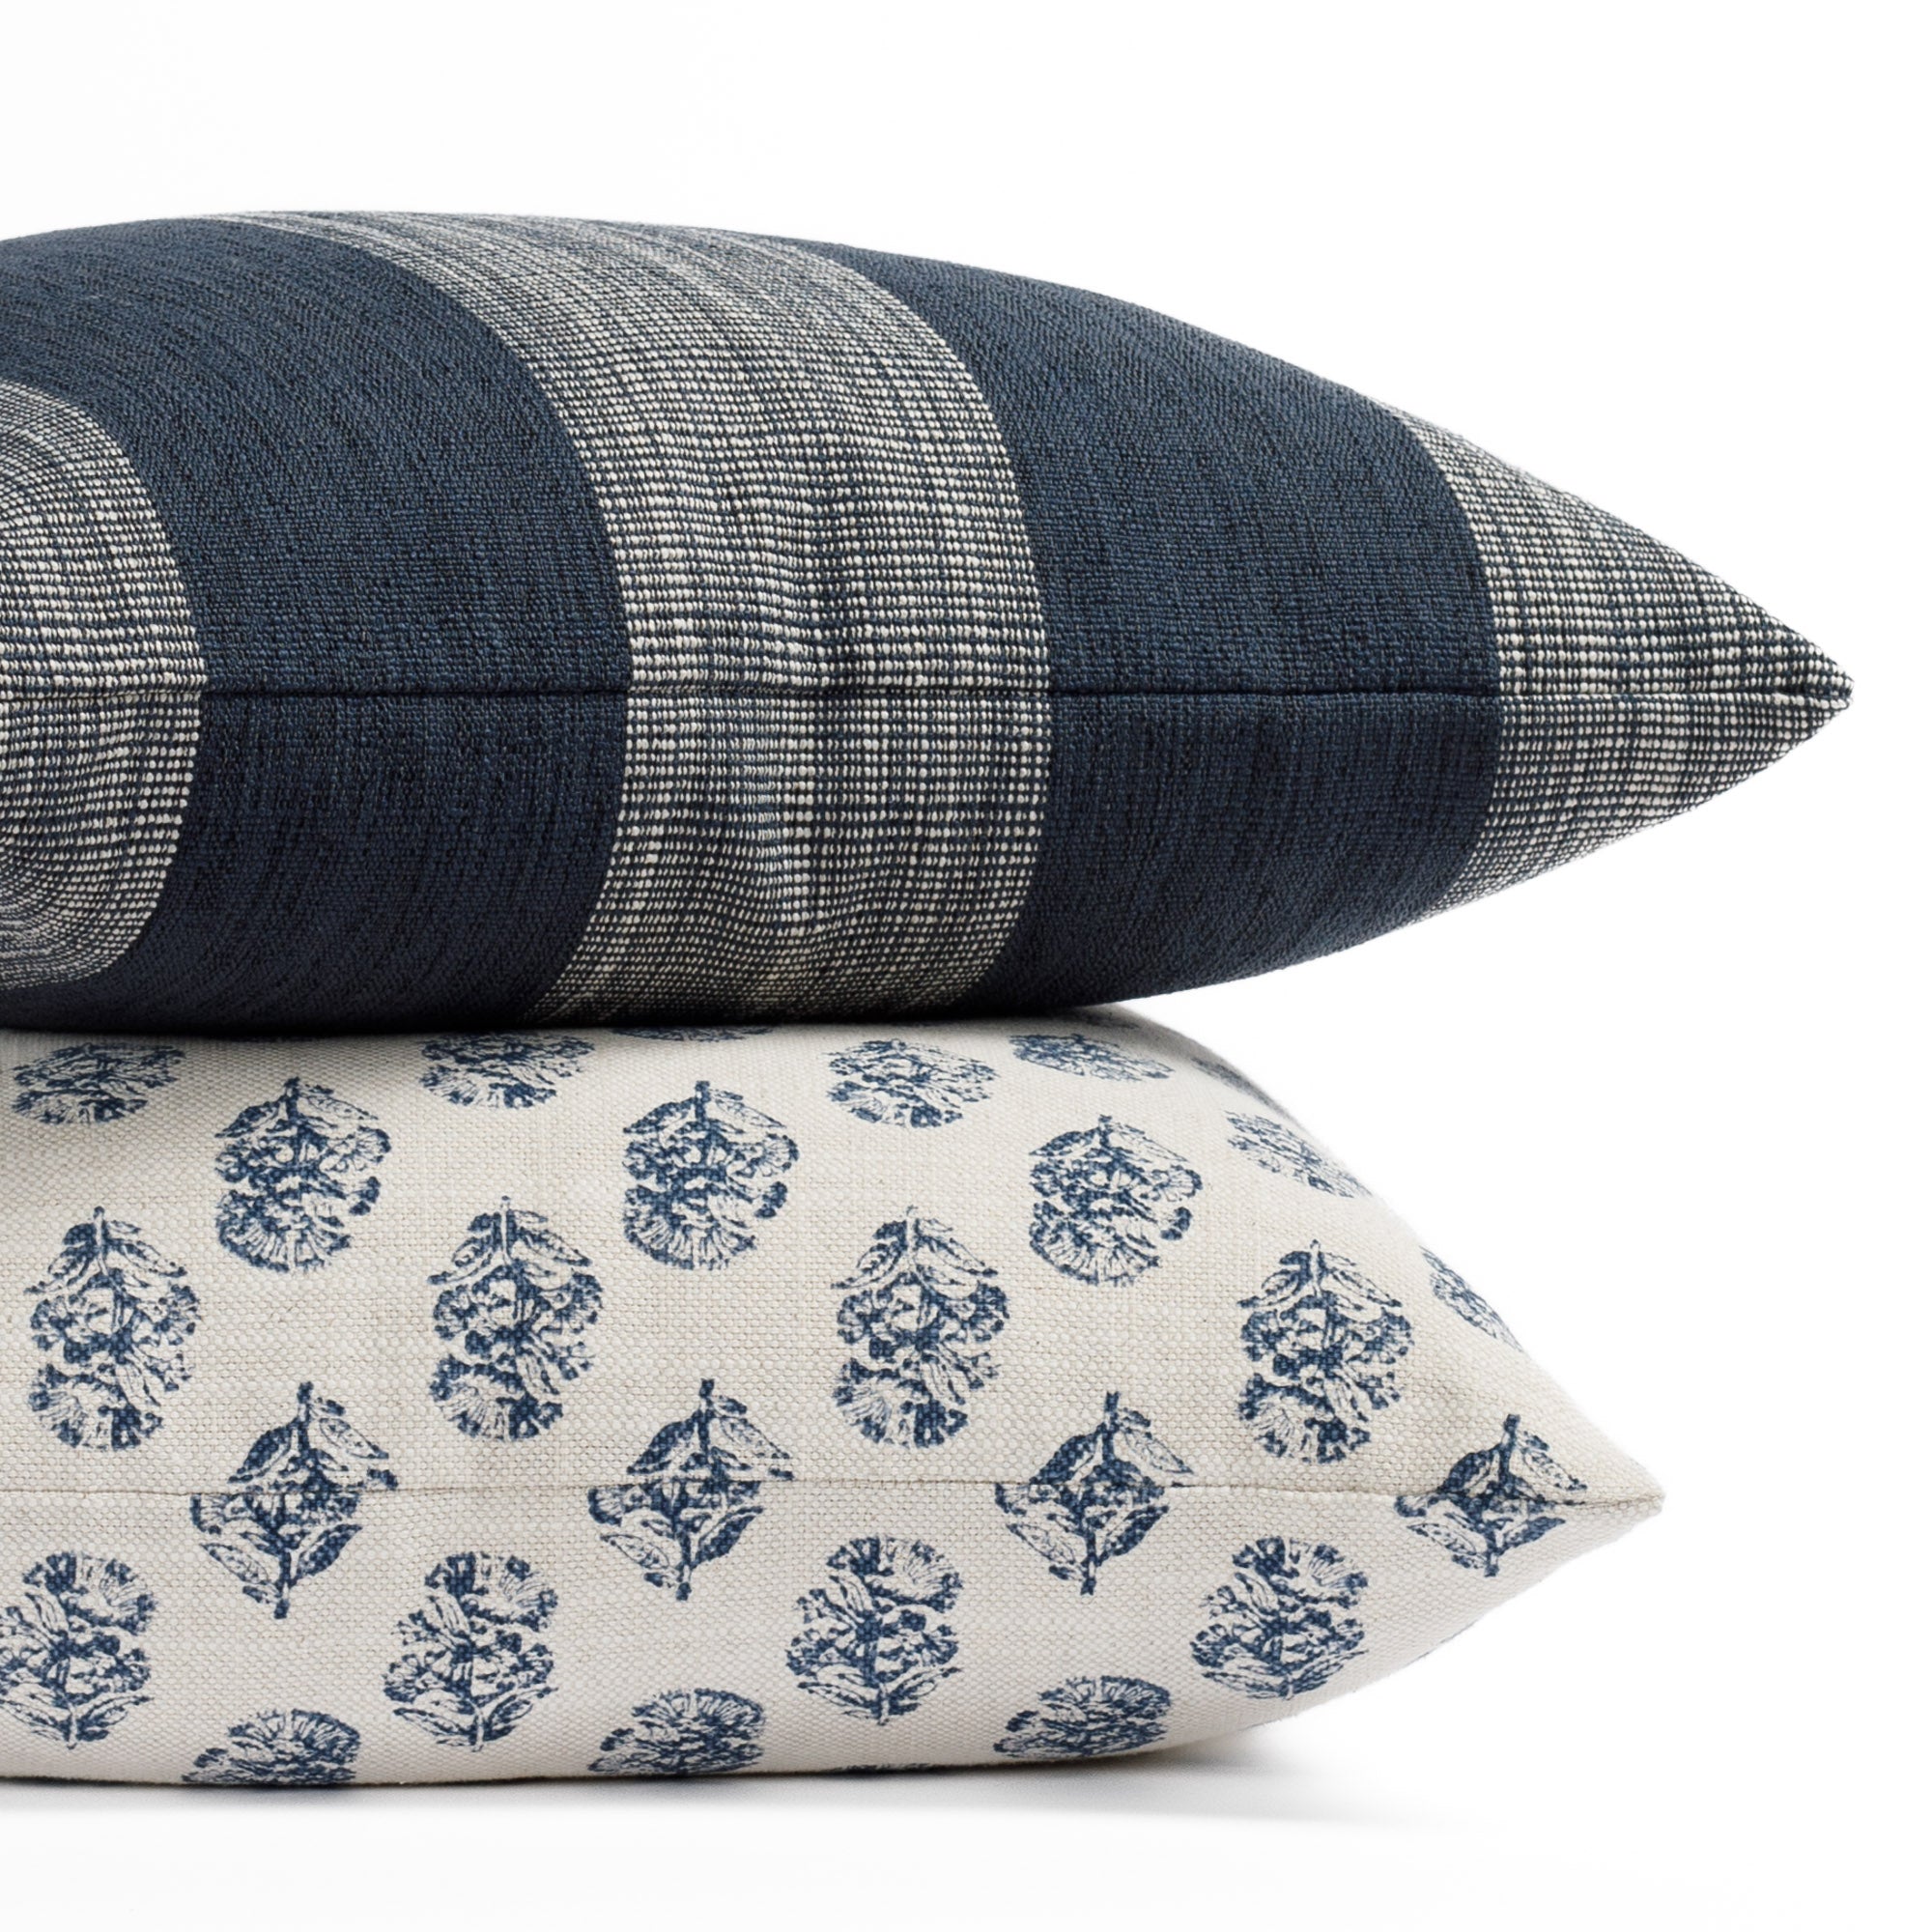 Blue and White patterned Tonic Living pillows